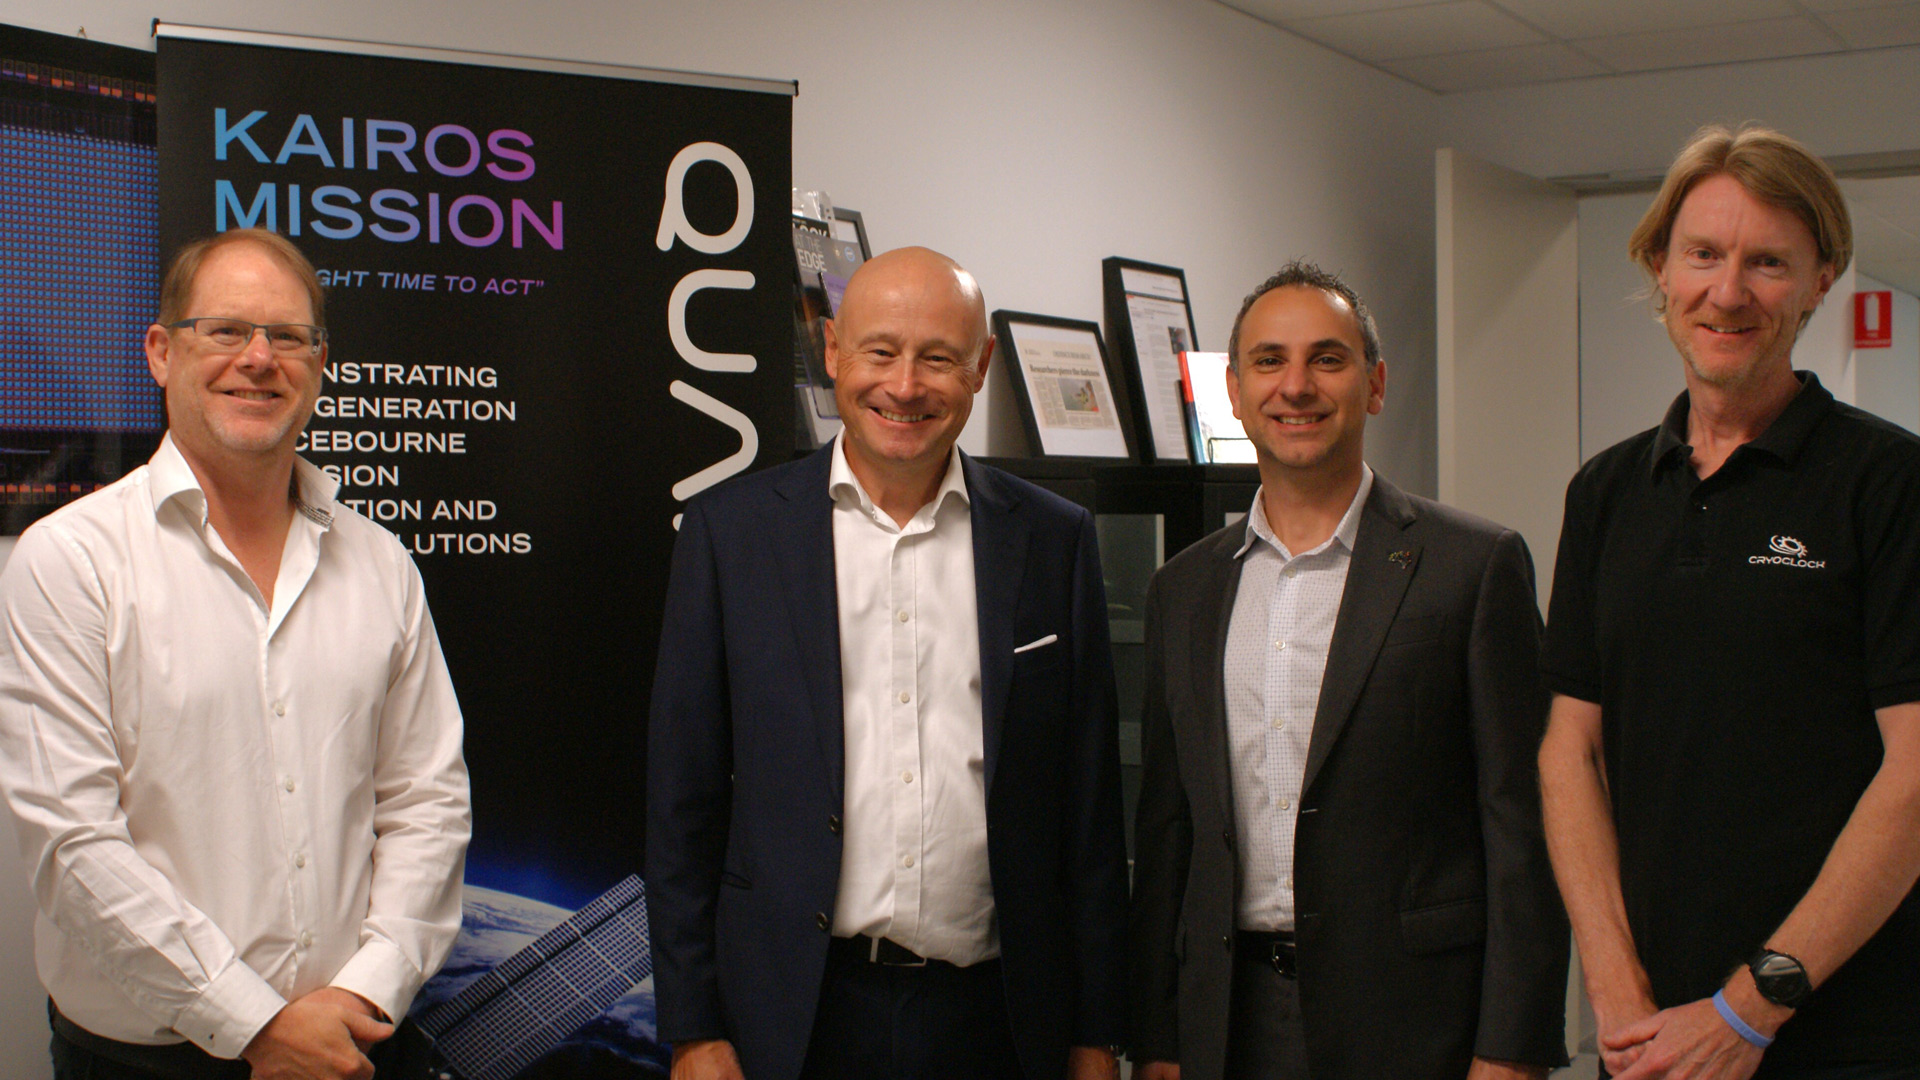 Prof Andre Luiten, Managing Director and Co-Founder QuantX Labs, Clive Oates, Head of SSTL Australia, Enrico Palermo, Head of Australian Space Agency and A/Prof Martin O’Connor General Manager QuantX Labs.